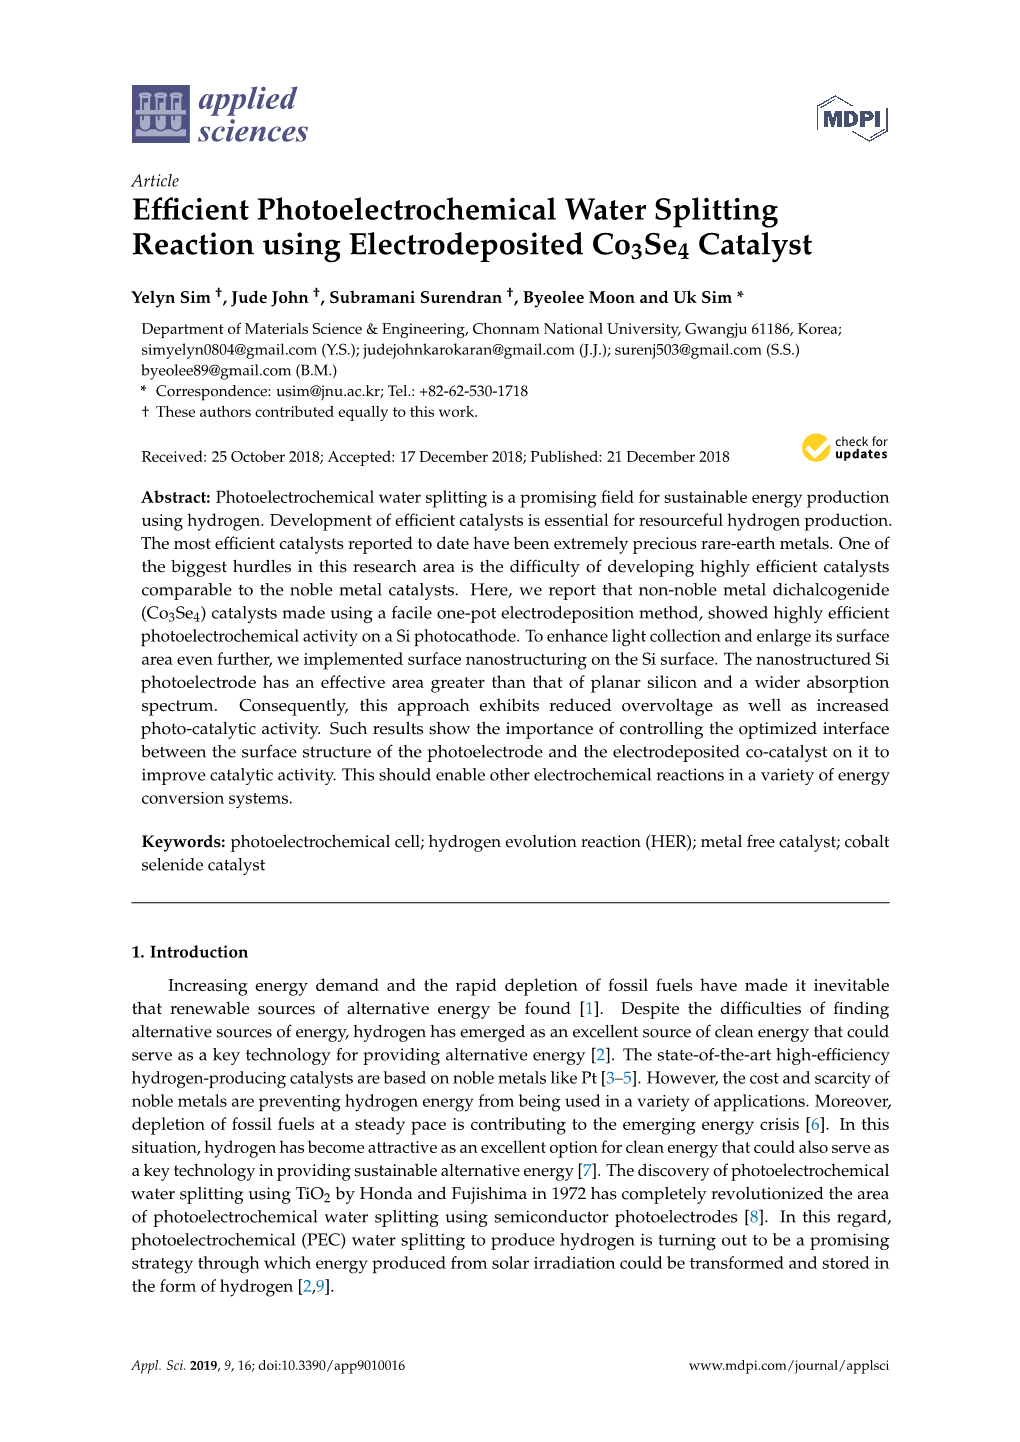 Efficient Photoelectrochemical Water Splitting Reaction Using